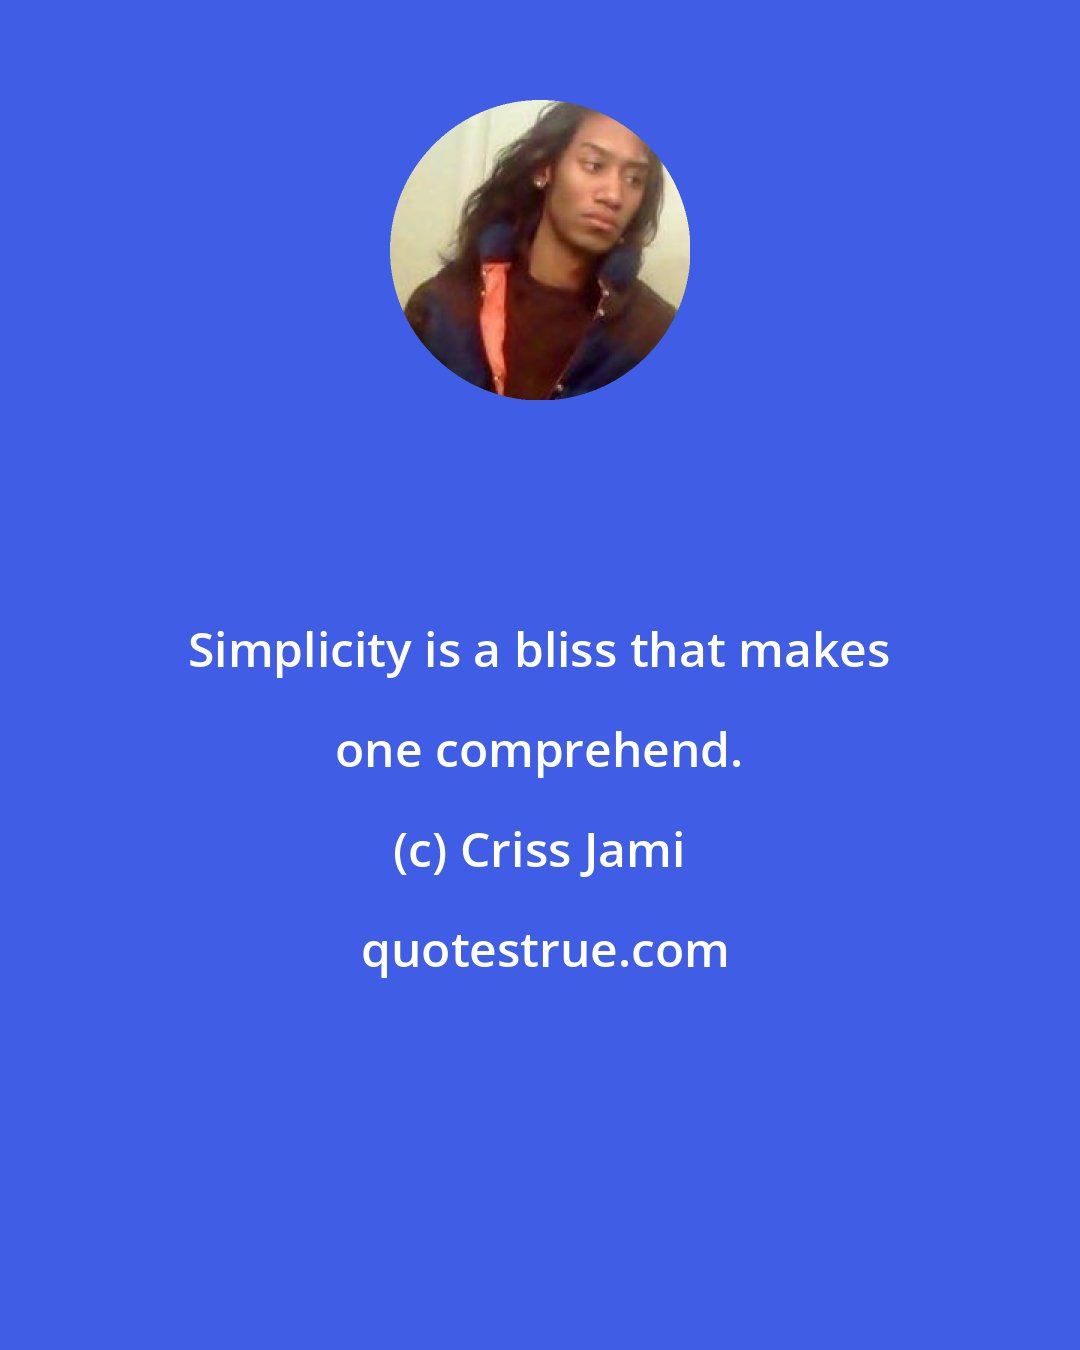 Criss Jami: Simplicity is a bliss that makes one comprehend.